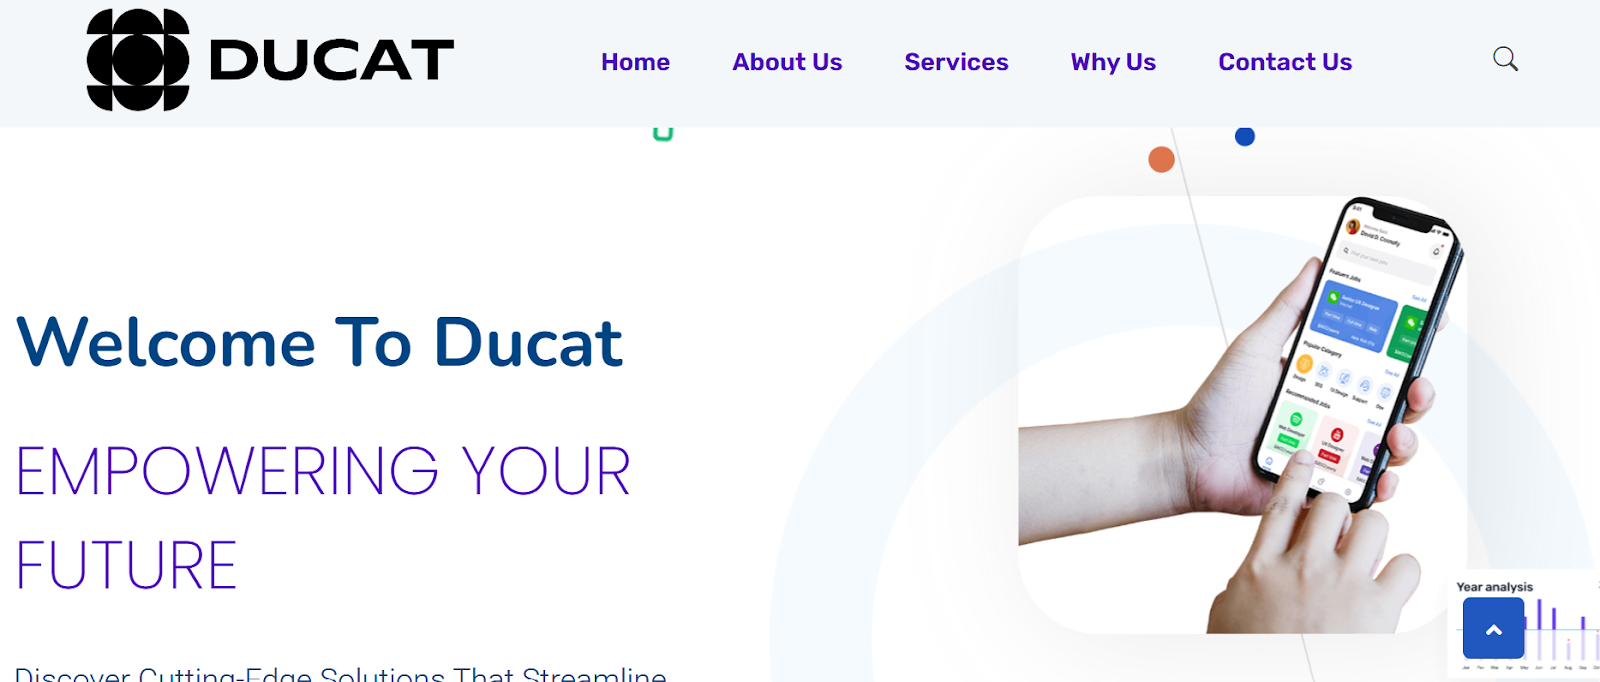 Ducat website snapshot highlighting the services it offers.